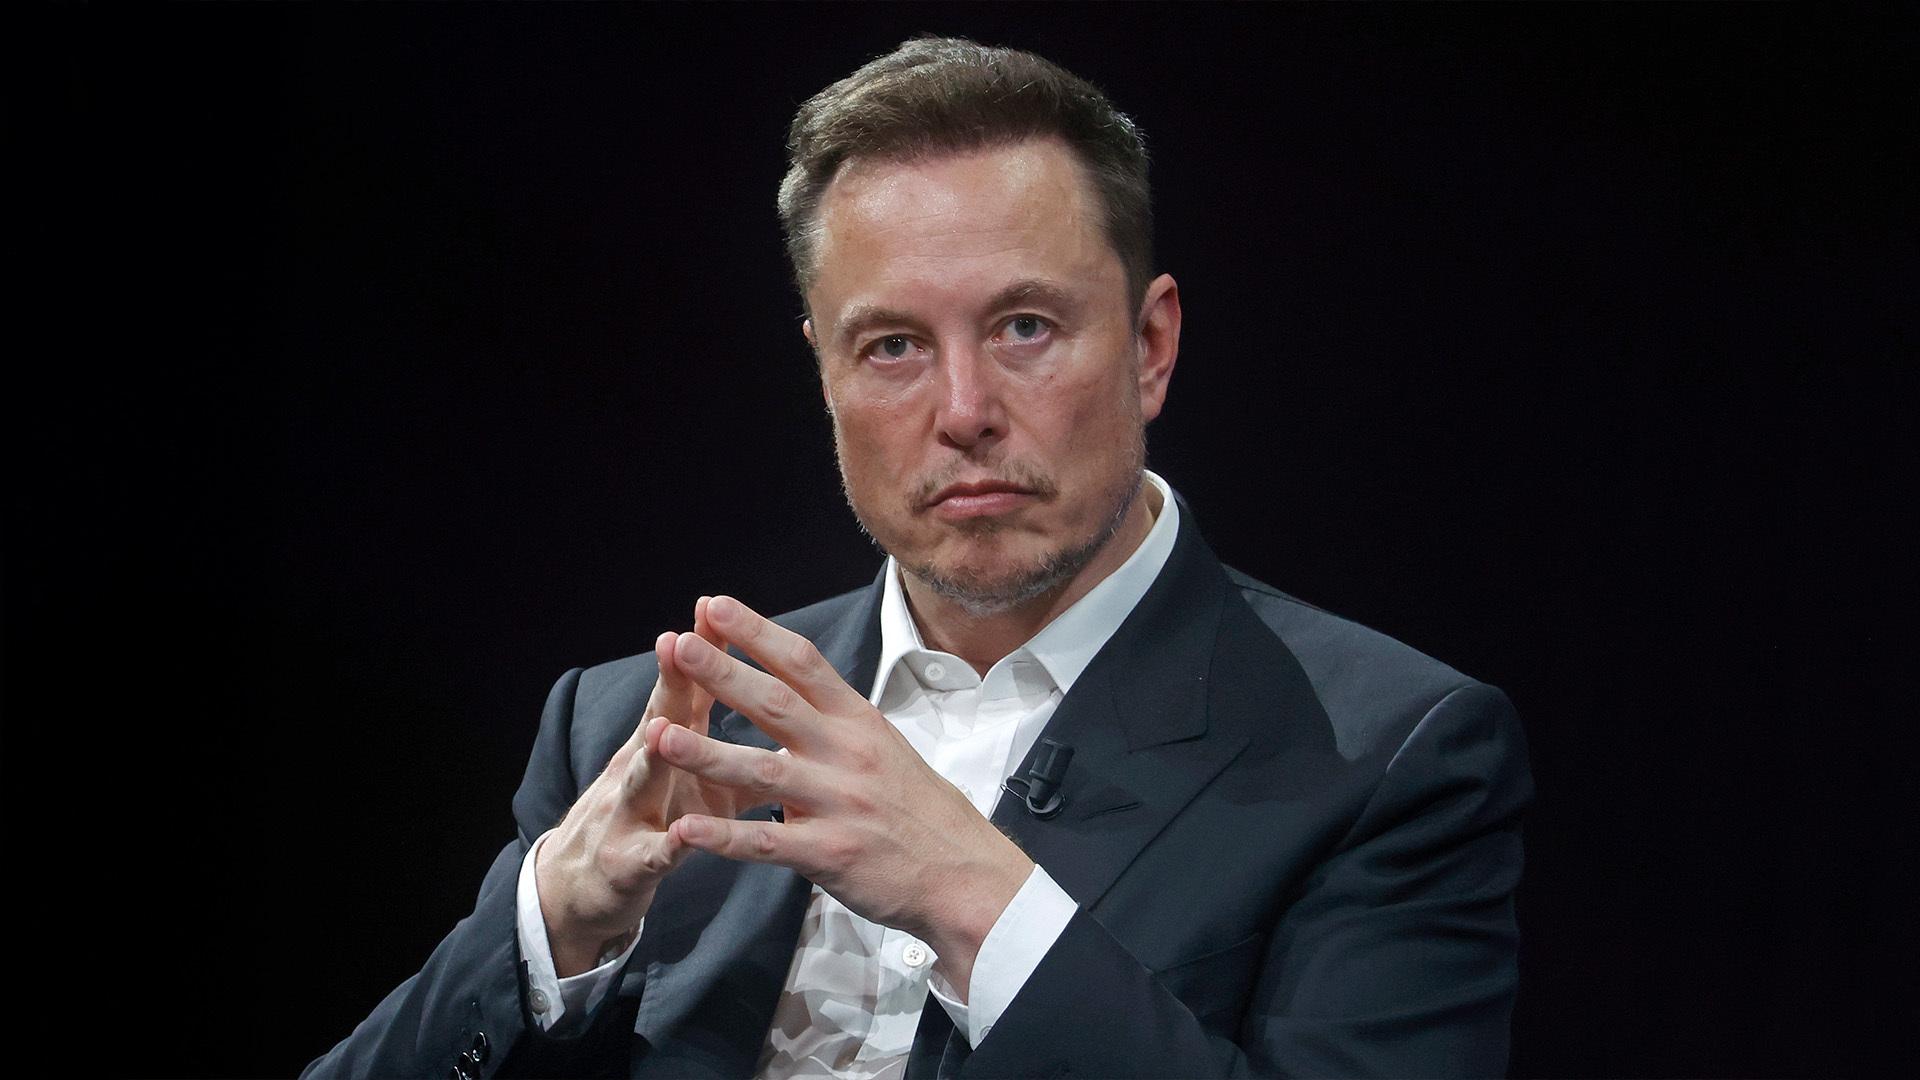 Elon Musk, CEO of Tesla and SpaceX, has been nominated for a Nobel Peace Prize for his support of free speech and diverse viewpoints.